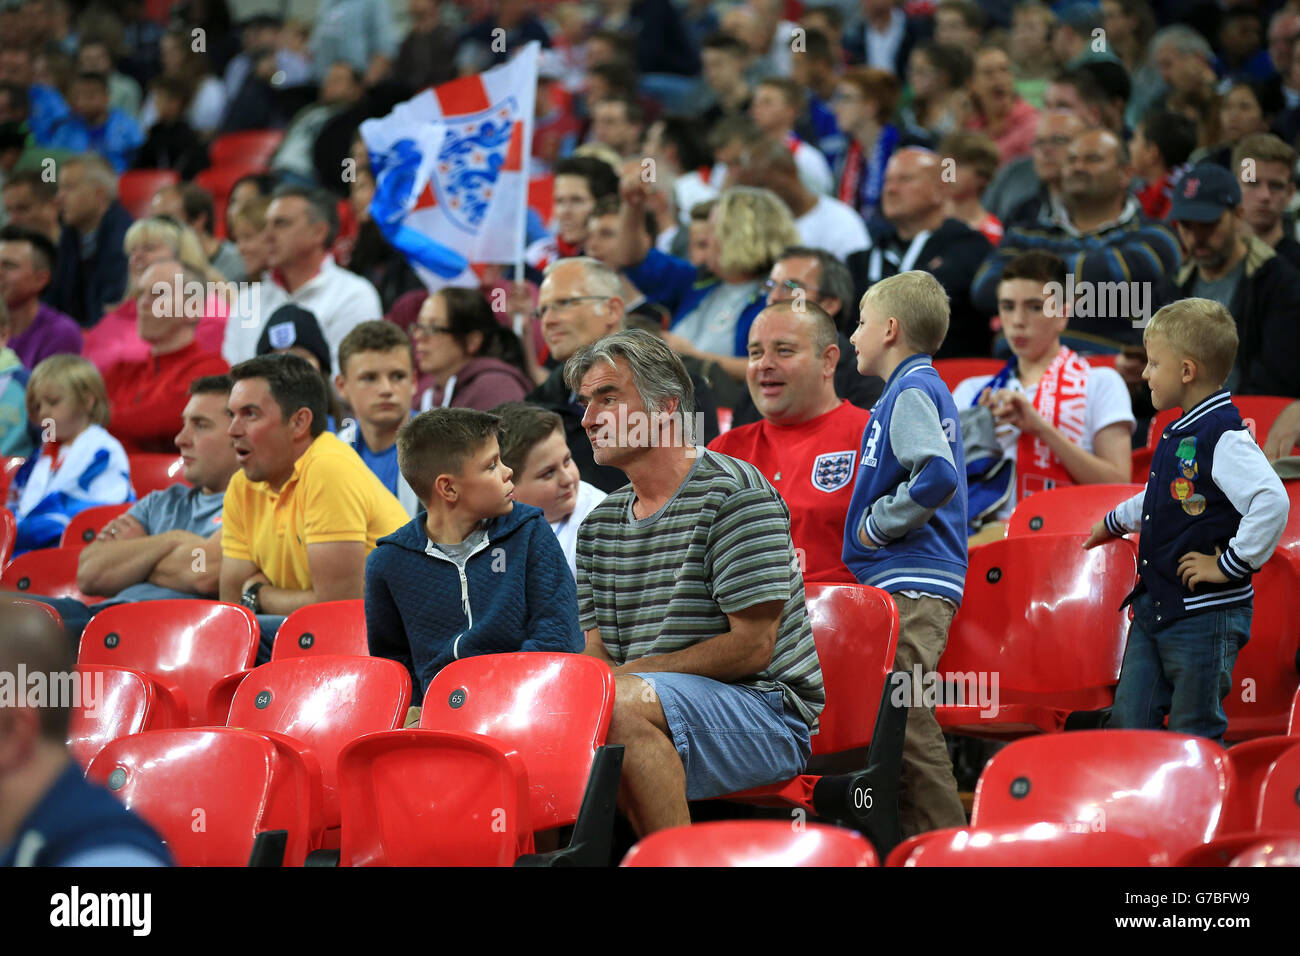 Empty seats can be seen in the stands during the International Friendly at Wembley Stadium, London. PRESS ASSOCIATION Photo. Picture date: Wednesday September 3, 2014. See PA story SOCCER England. Photo credit should read: Nick Potts/PA Wire. Stock Photo